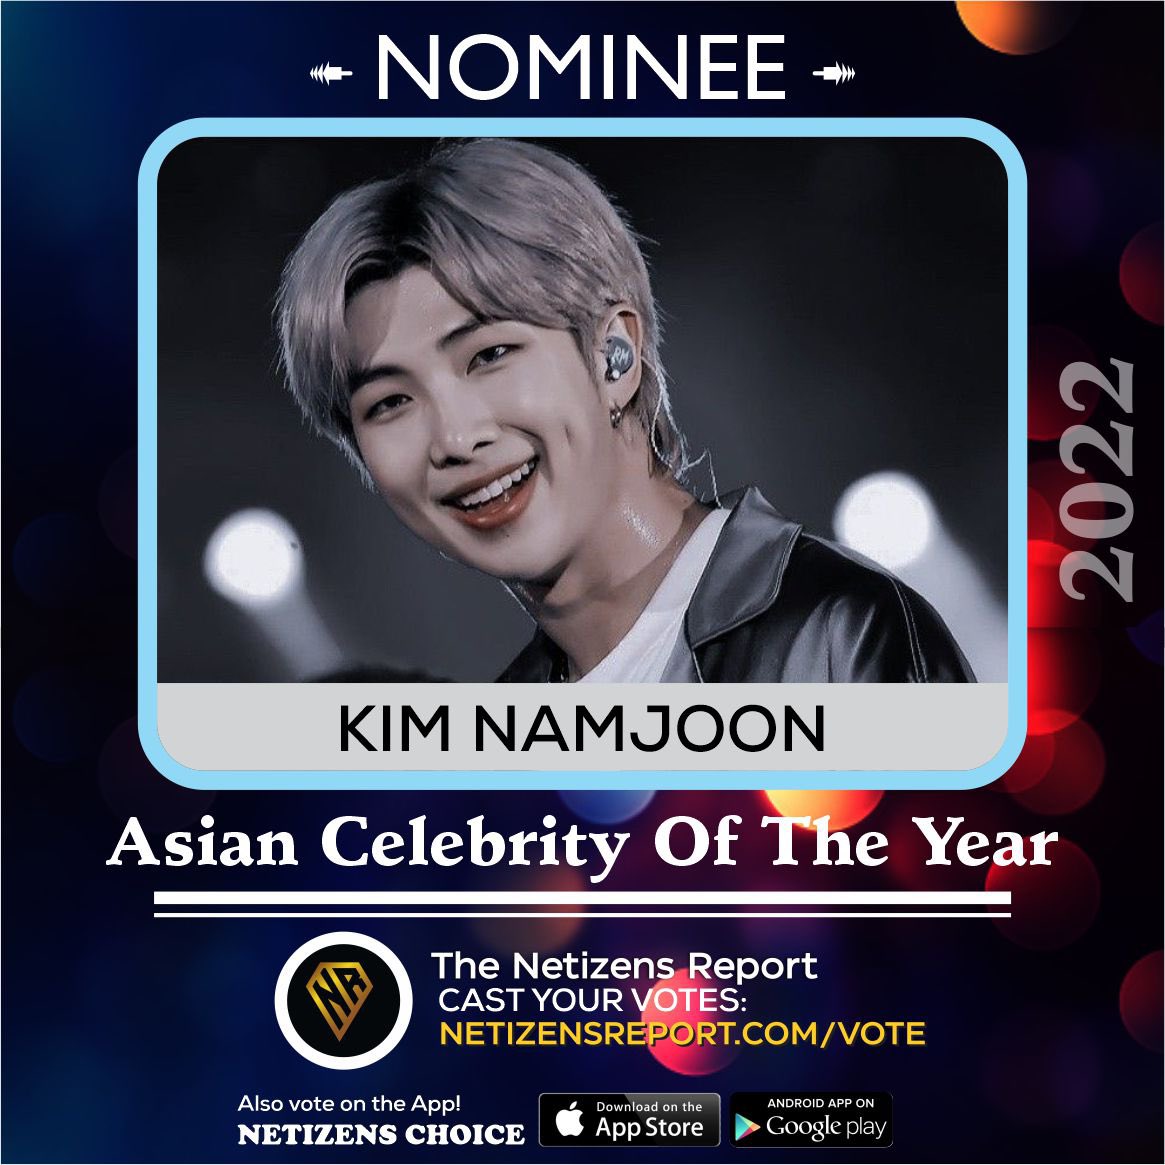 RM is nominated for Asian Celebrity Of The Year 2022!

Please help and vote! Just reply and tweet with:

I vote #KimNamjoon #RM of @BTS_twt for #NETIZENSREPORT as Asian Celebrity of the Year #ACOTY2022 #NOMINEE